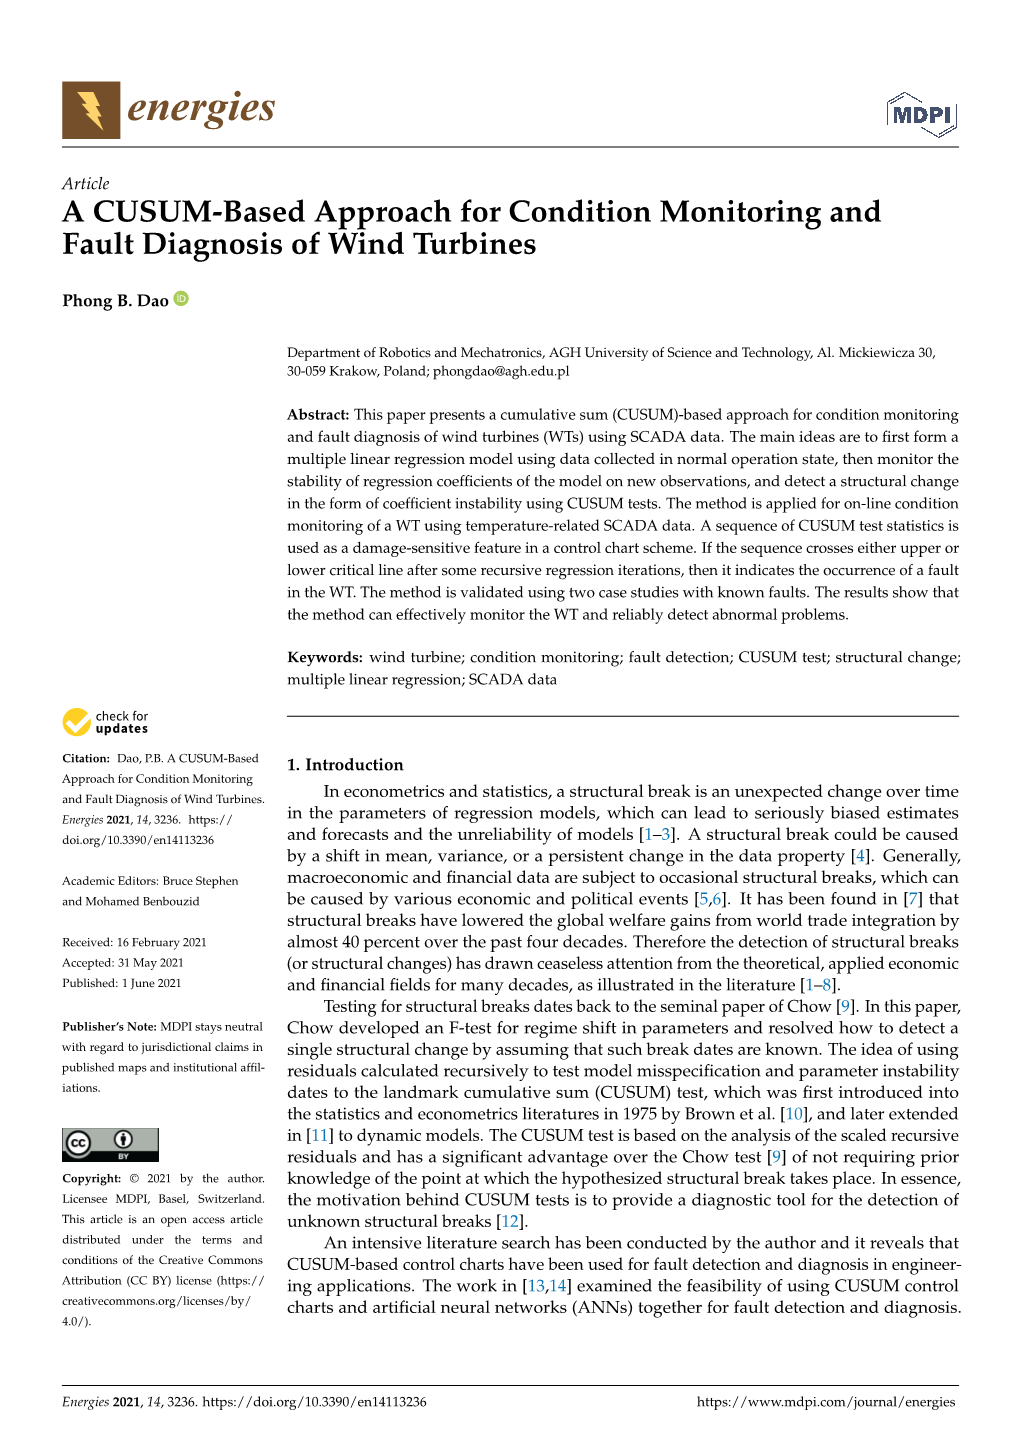 A CUSUM-Based Approach for Condition Monitoring and Fault Diagnosis of Wind Turbines